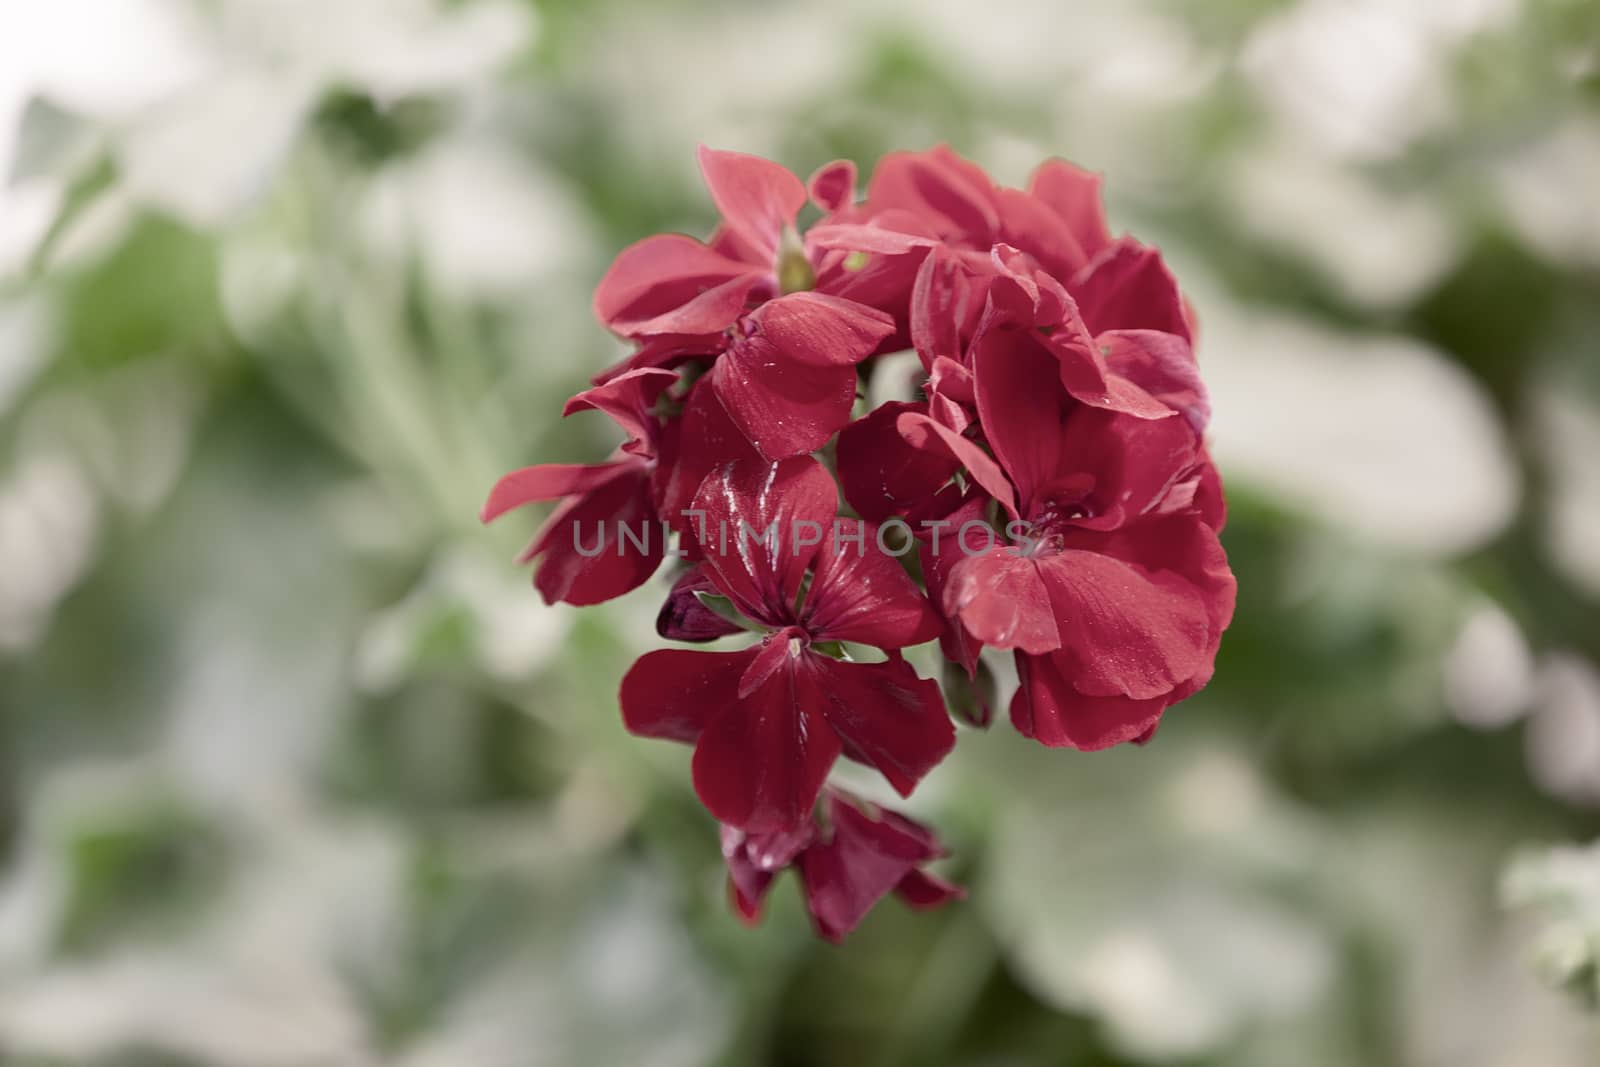 red pelargonium in bloom, note shallow depth of field